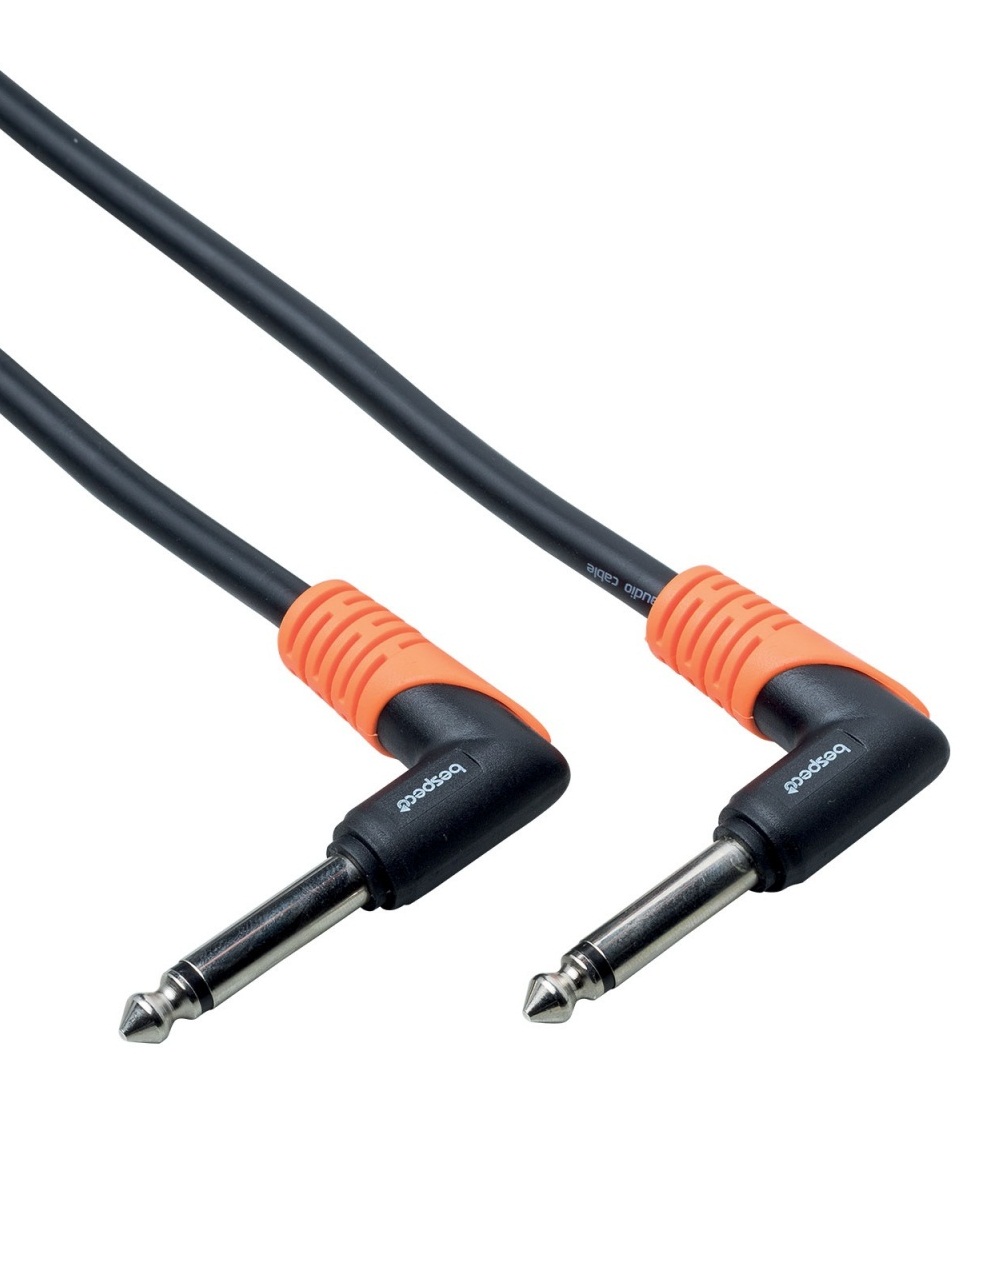 Bespeco SLPP030 Patch Cable - 90 degree Angled ends - 0.3 Mtrs